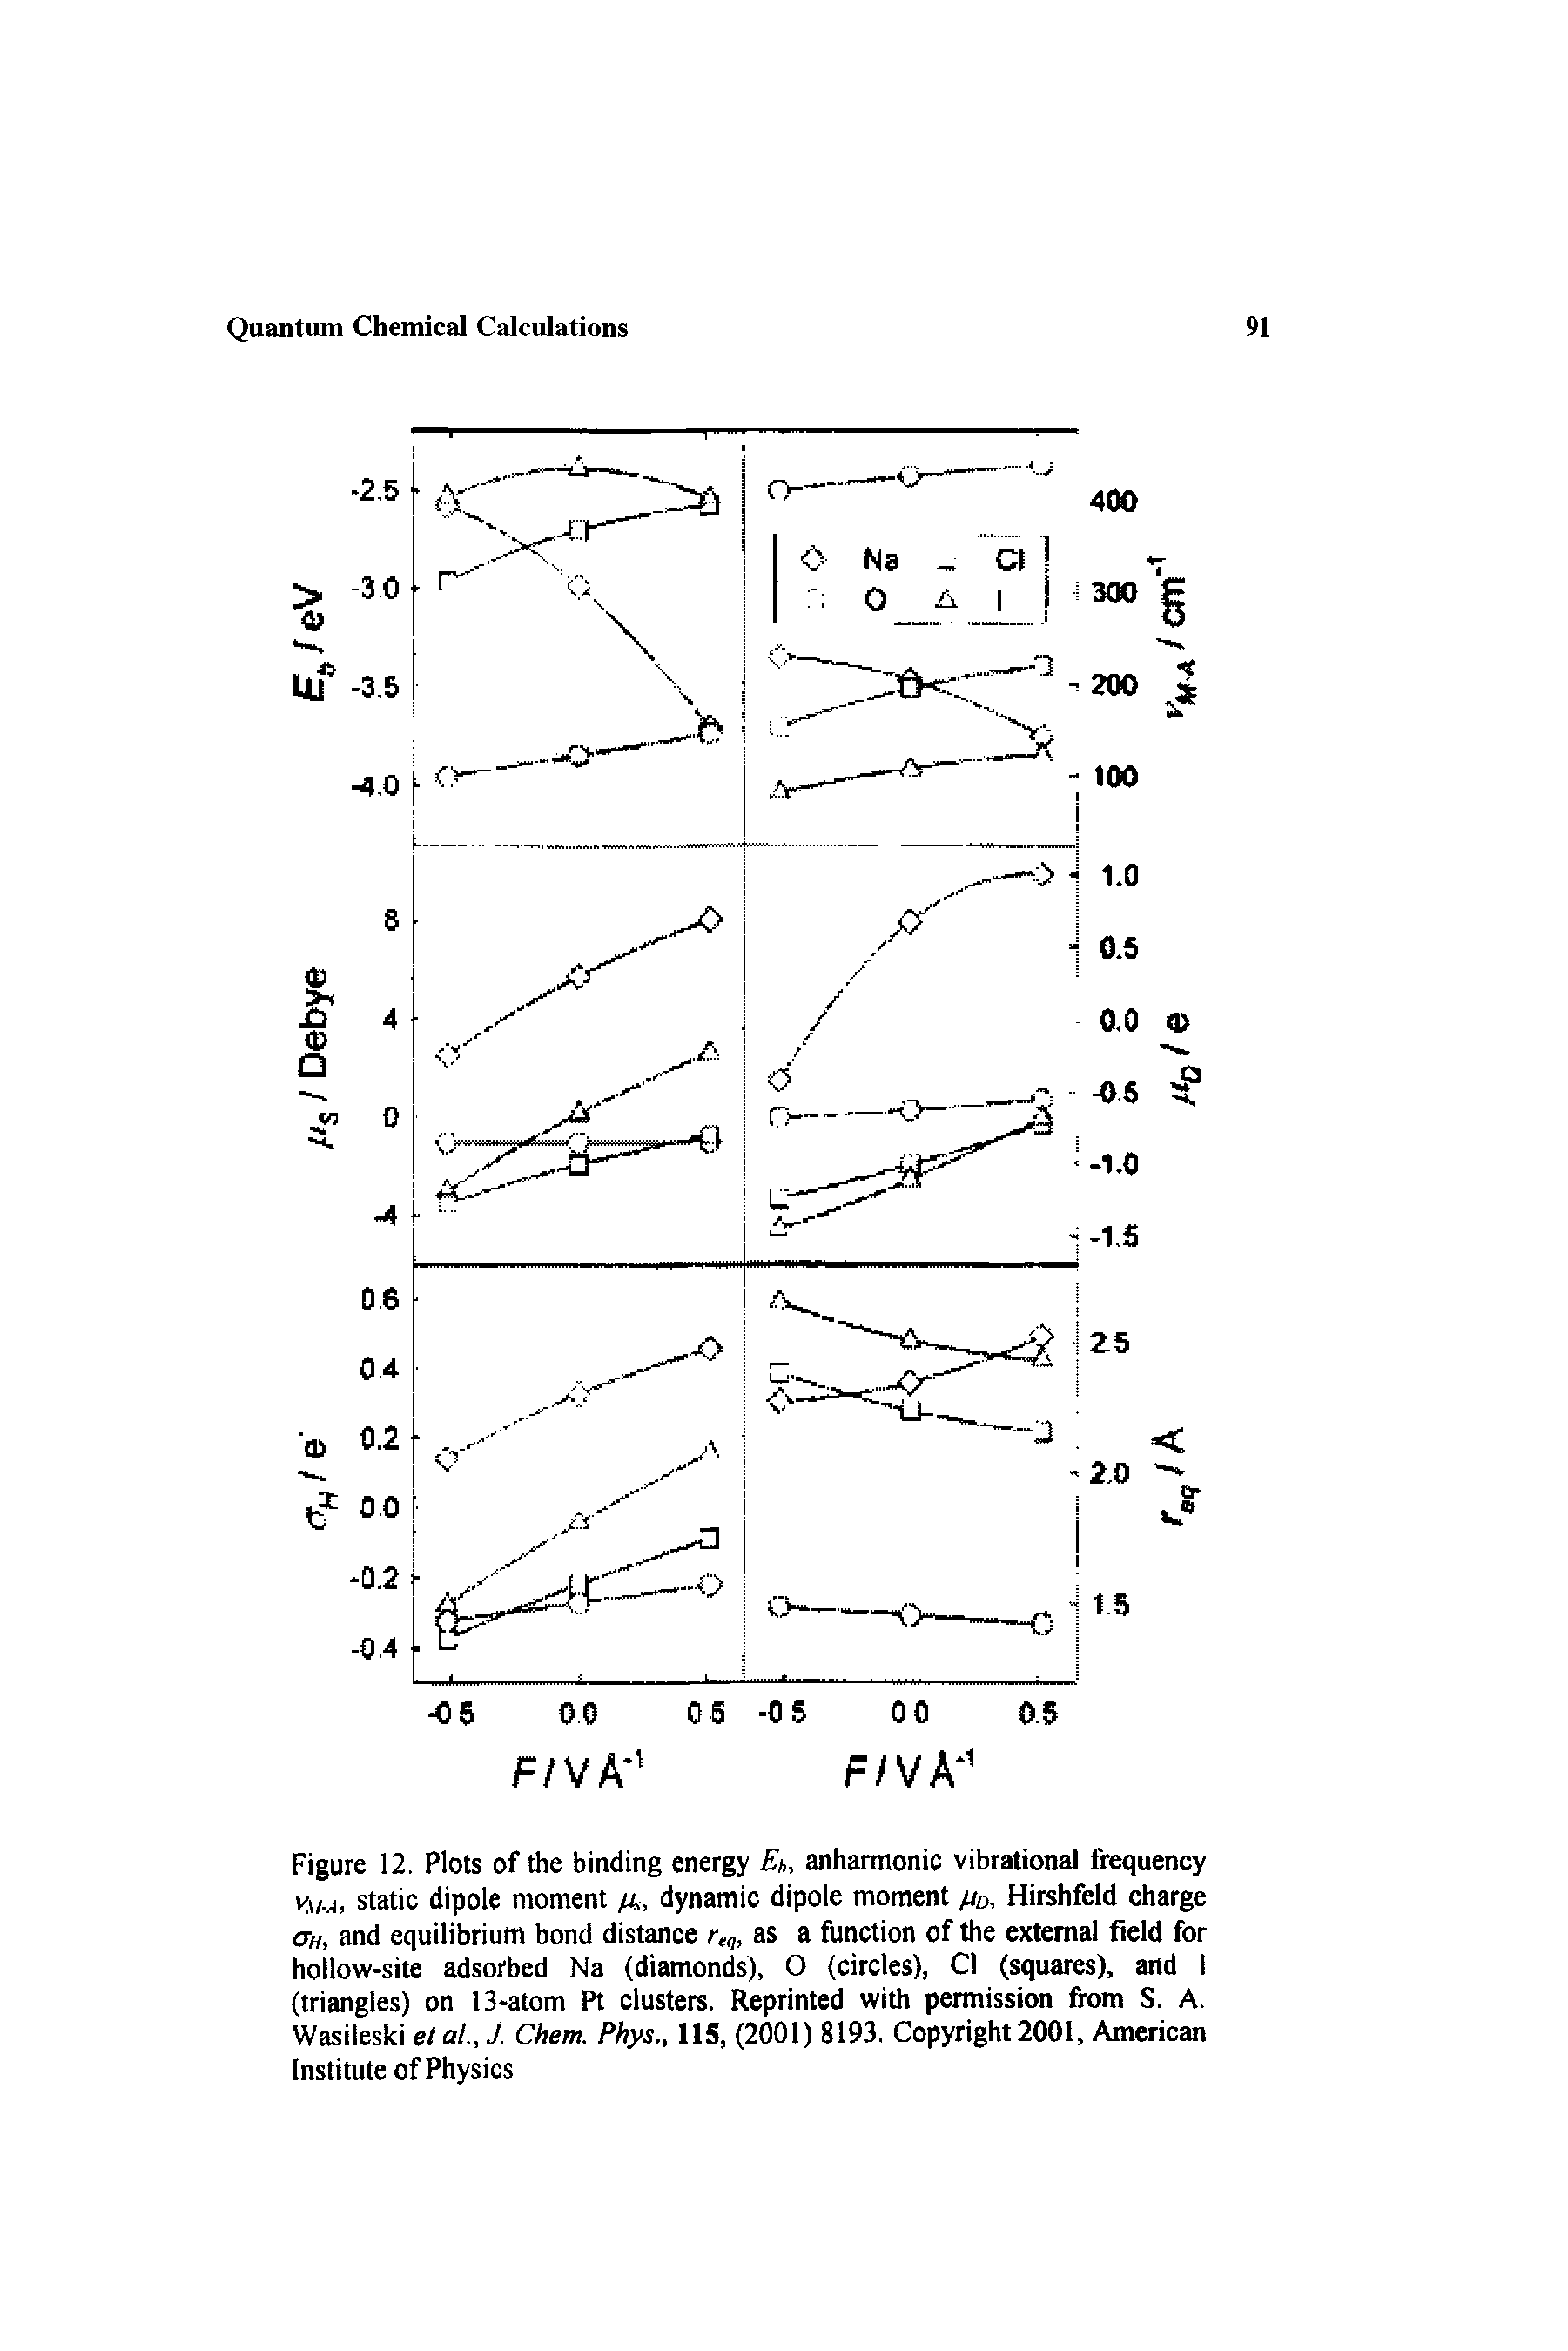 Figure 12. Plots of the binding energy Eh, anharmonic vibrational frequency vm.a, static dipole moment /t, dynamic dipole moment /, Hitshfeld charge Oh, and equilibrium bond distance r, as a function of the external field for hollow-site adsorbed Na (diamonds), O (circles), C (squares), and I (triangles) on 13-atom Pt clusters. Reprinted with permission fi-om S. A. Wasileski e al., J. Chem. Phys., IIS, (2001) 8193. Copyright 2001, American Institute of Physics...